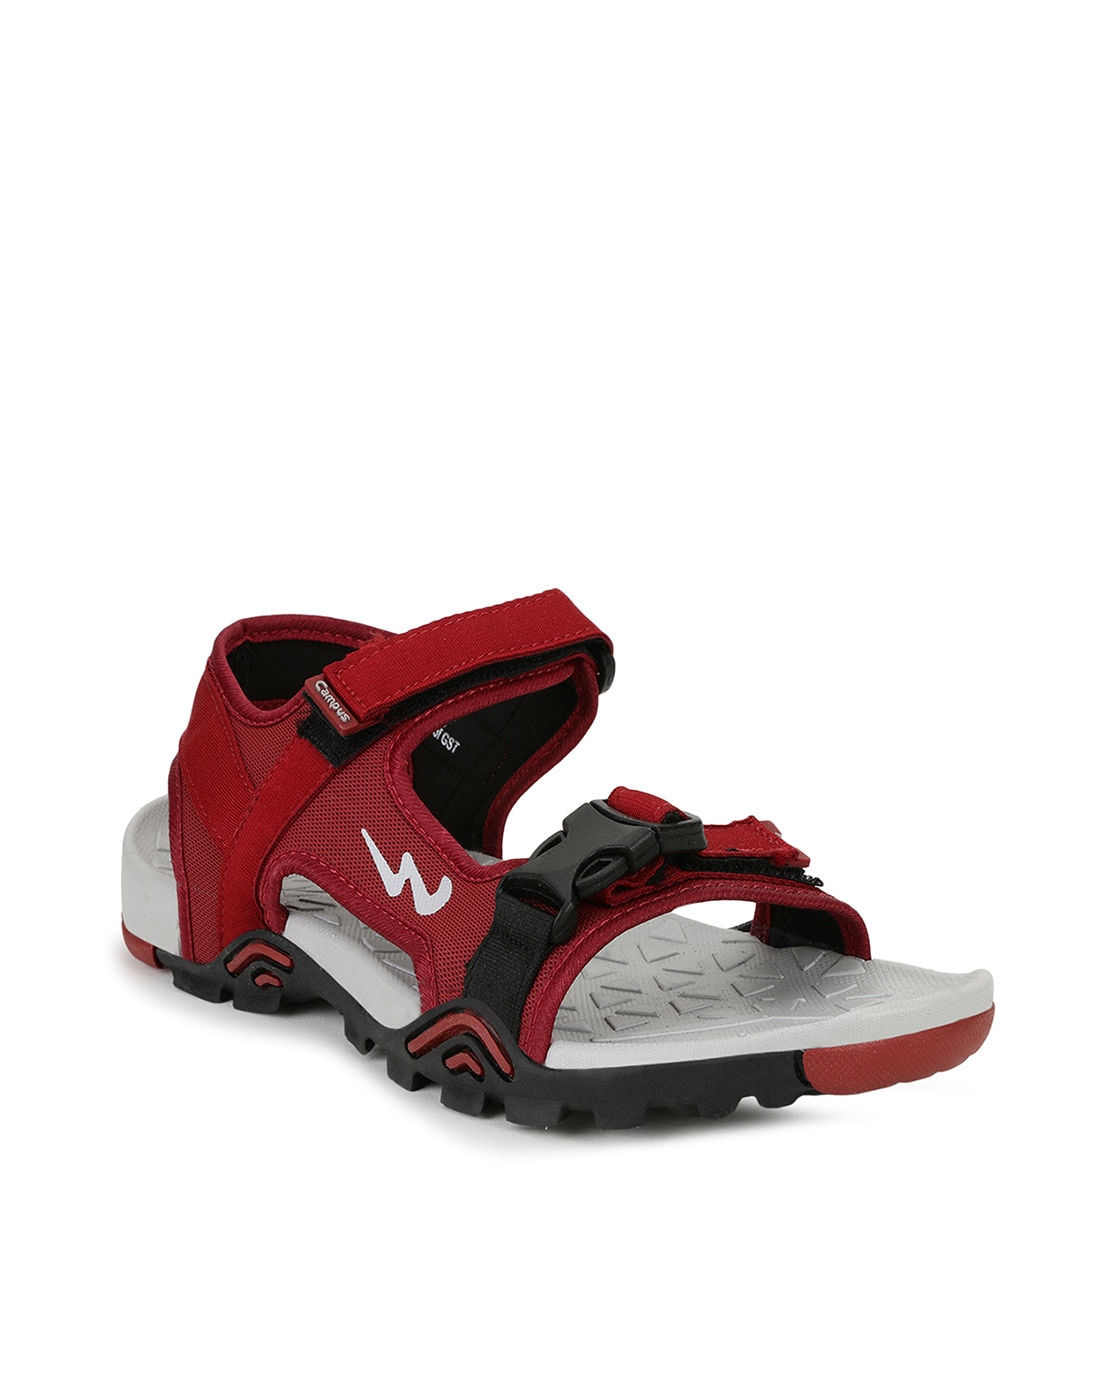 Buy Sandals For Men: Gc-2308-Navy-Red | Campus Shoes